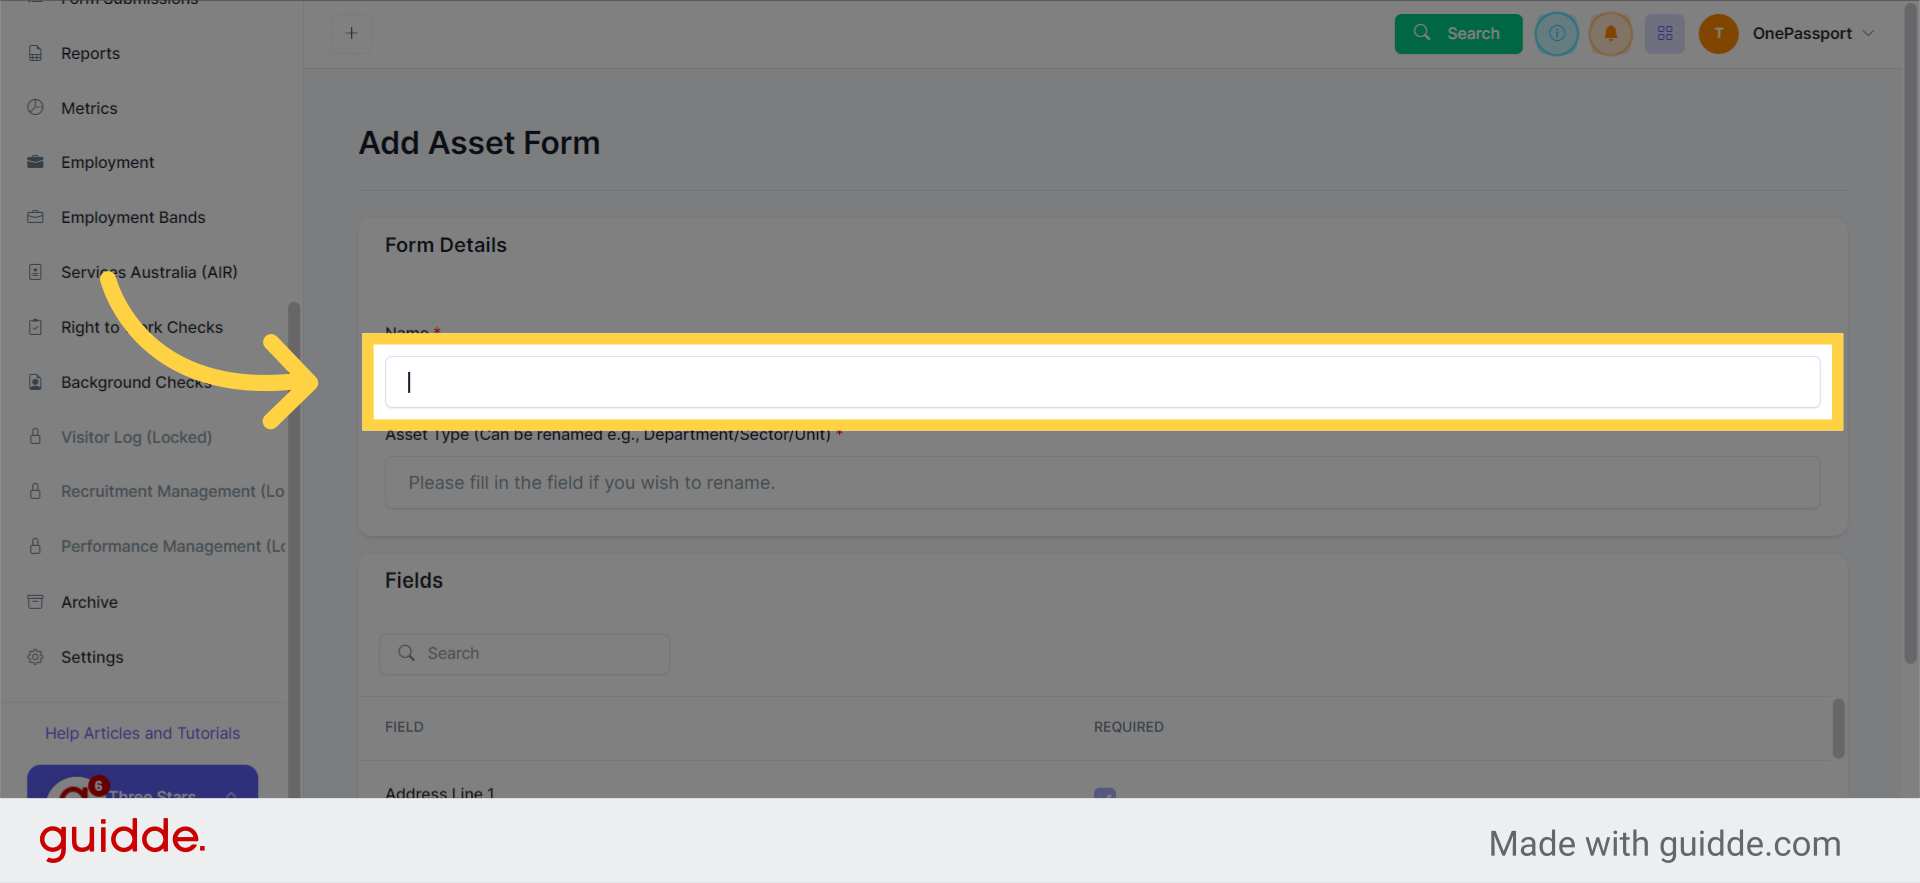 Provide a 'Name' for the Form